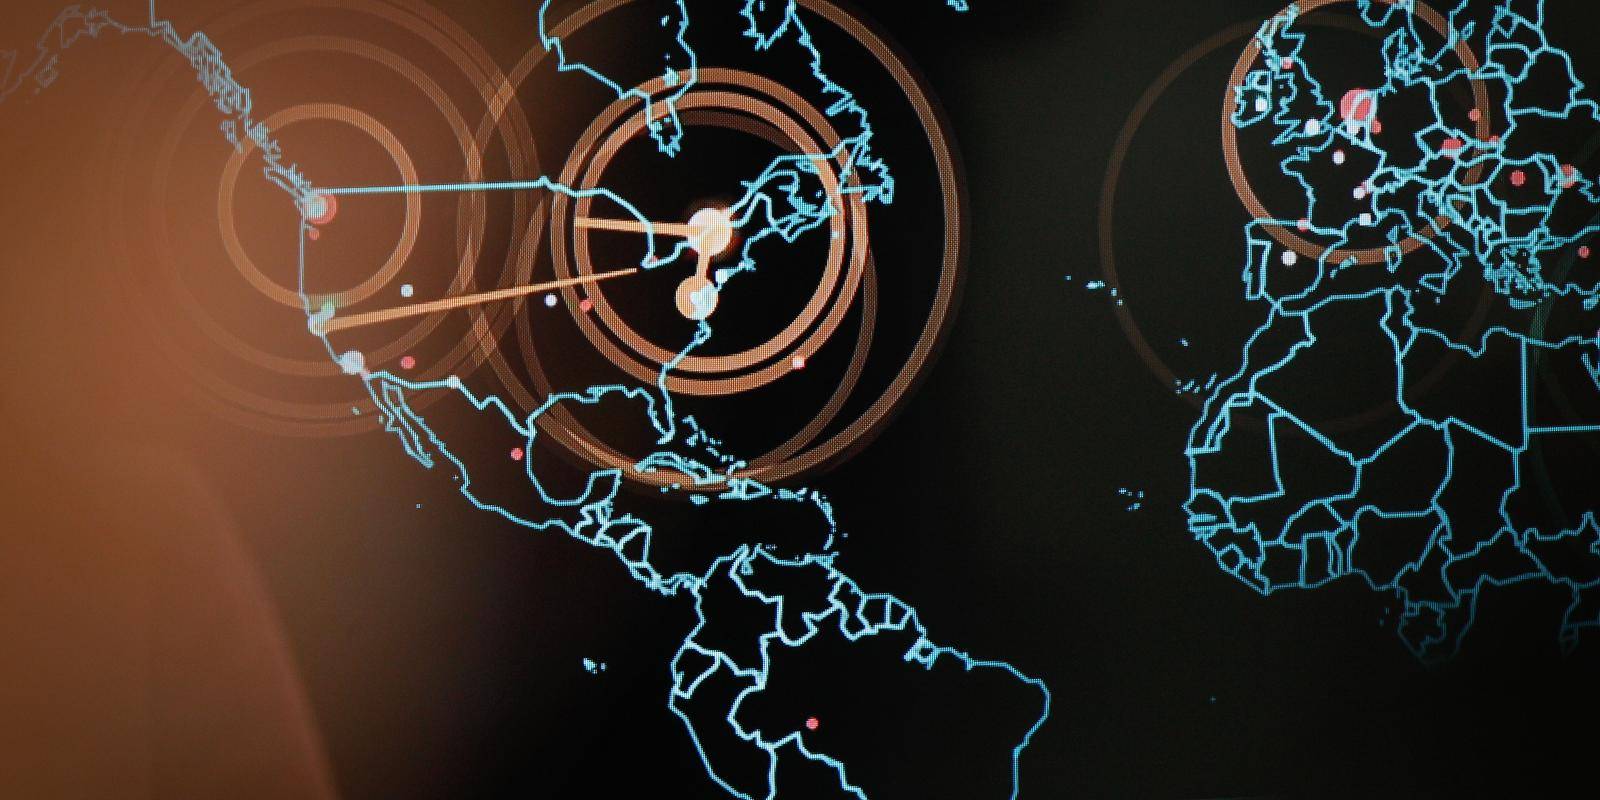 A large screen with outline map of the world depicting a simulated cyberattack